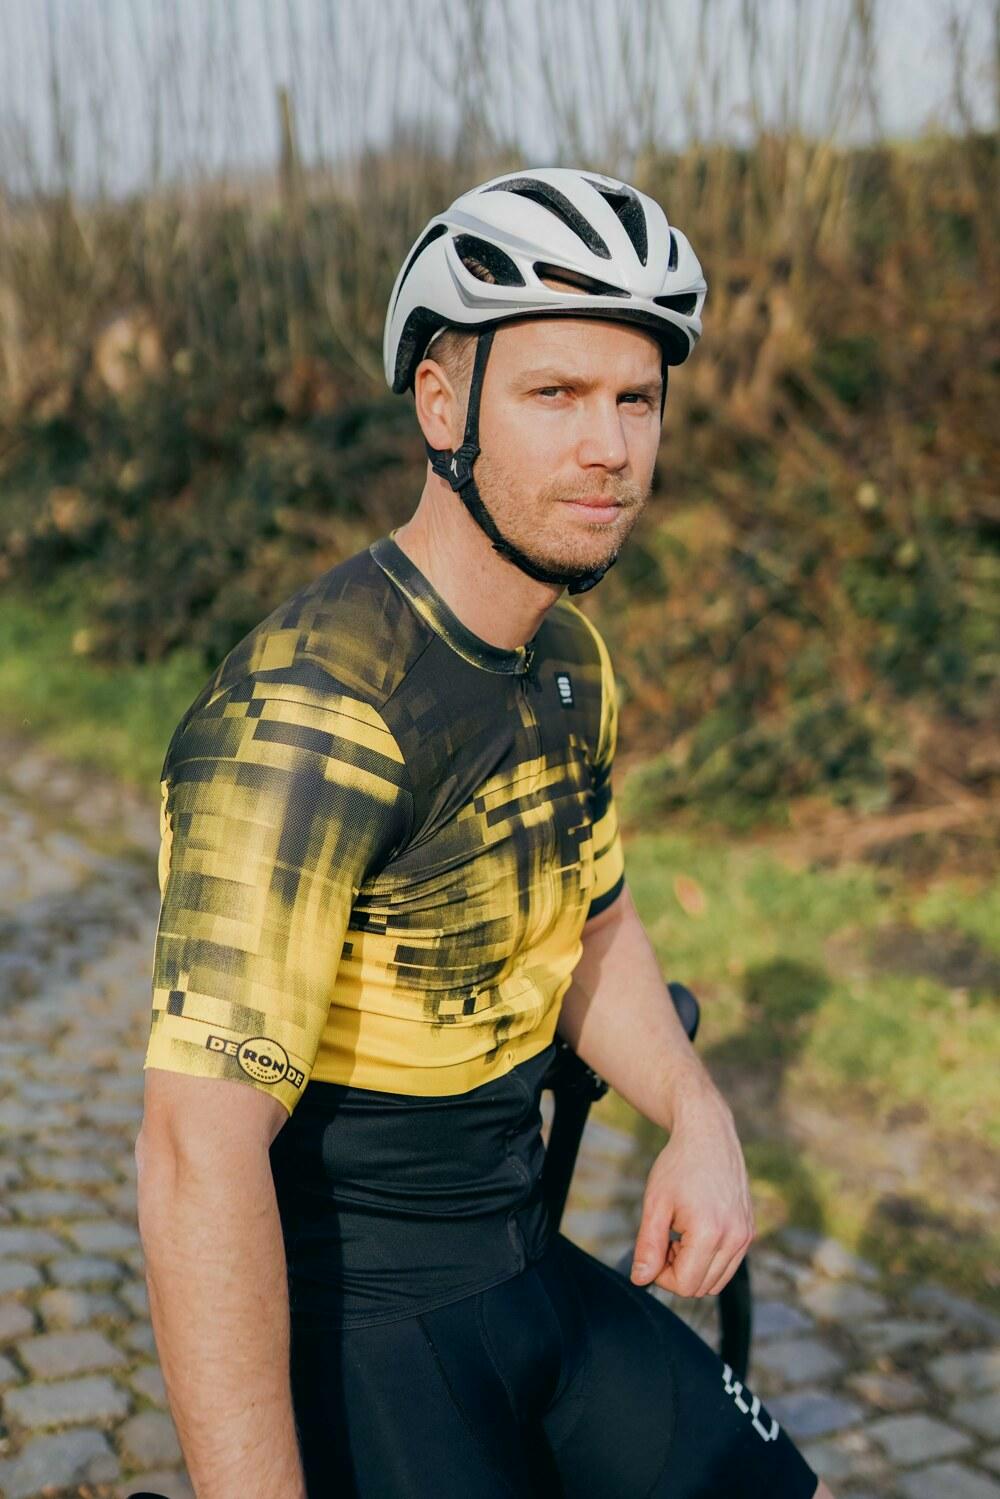 Sporful launches Tour of Flanders collection